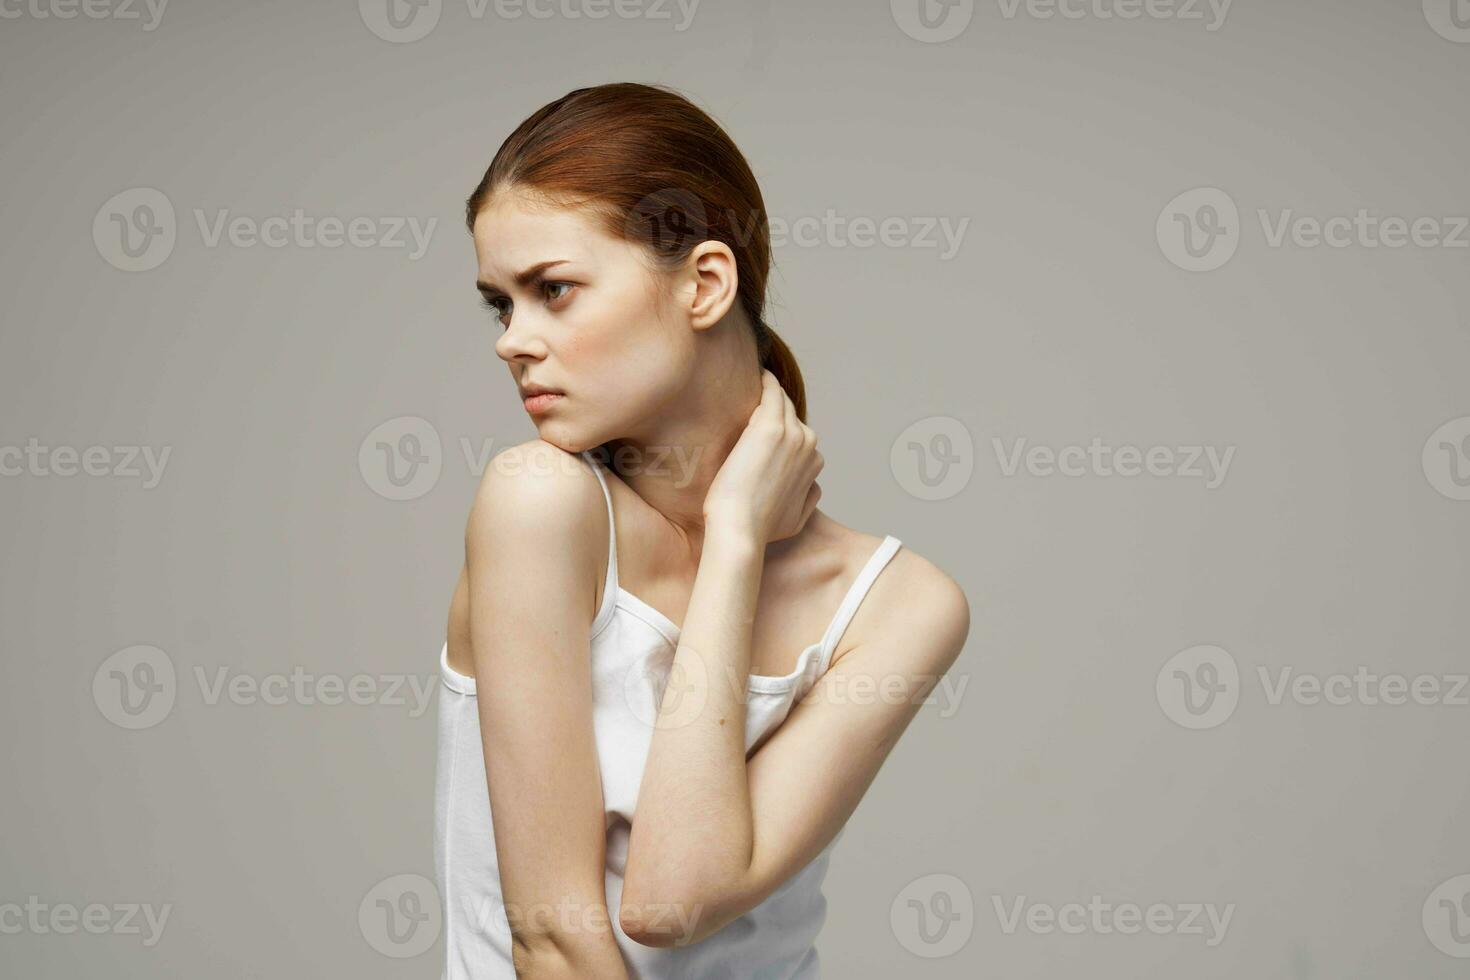 woman pain in the neck arthritis chronic disease isolated background photo